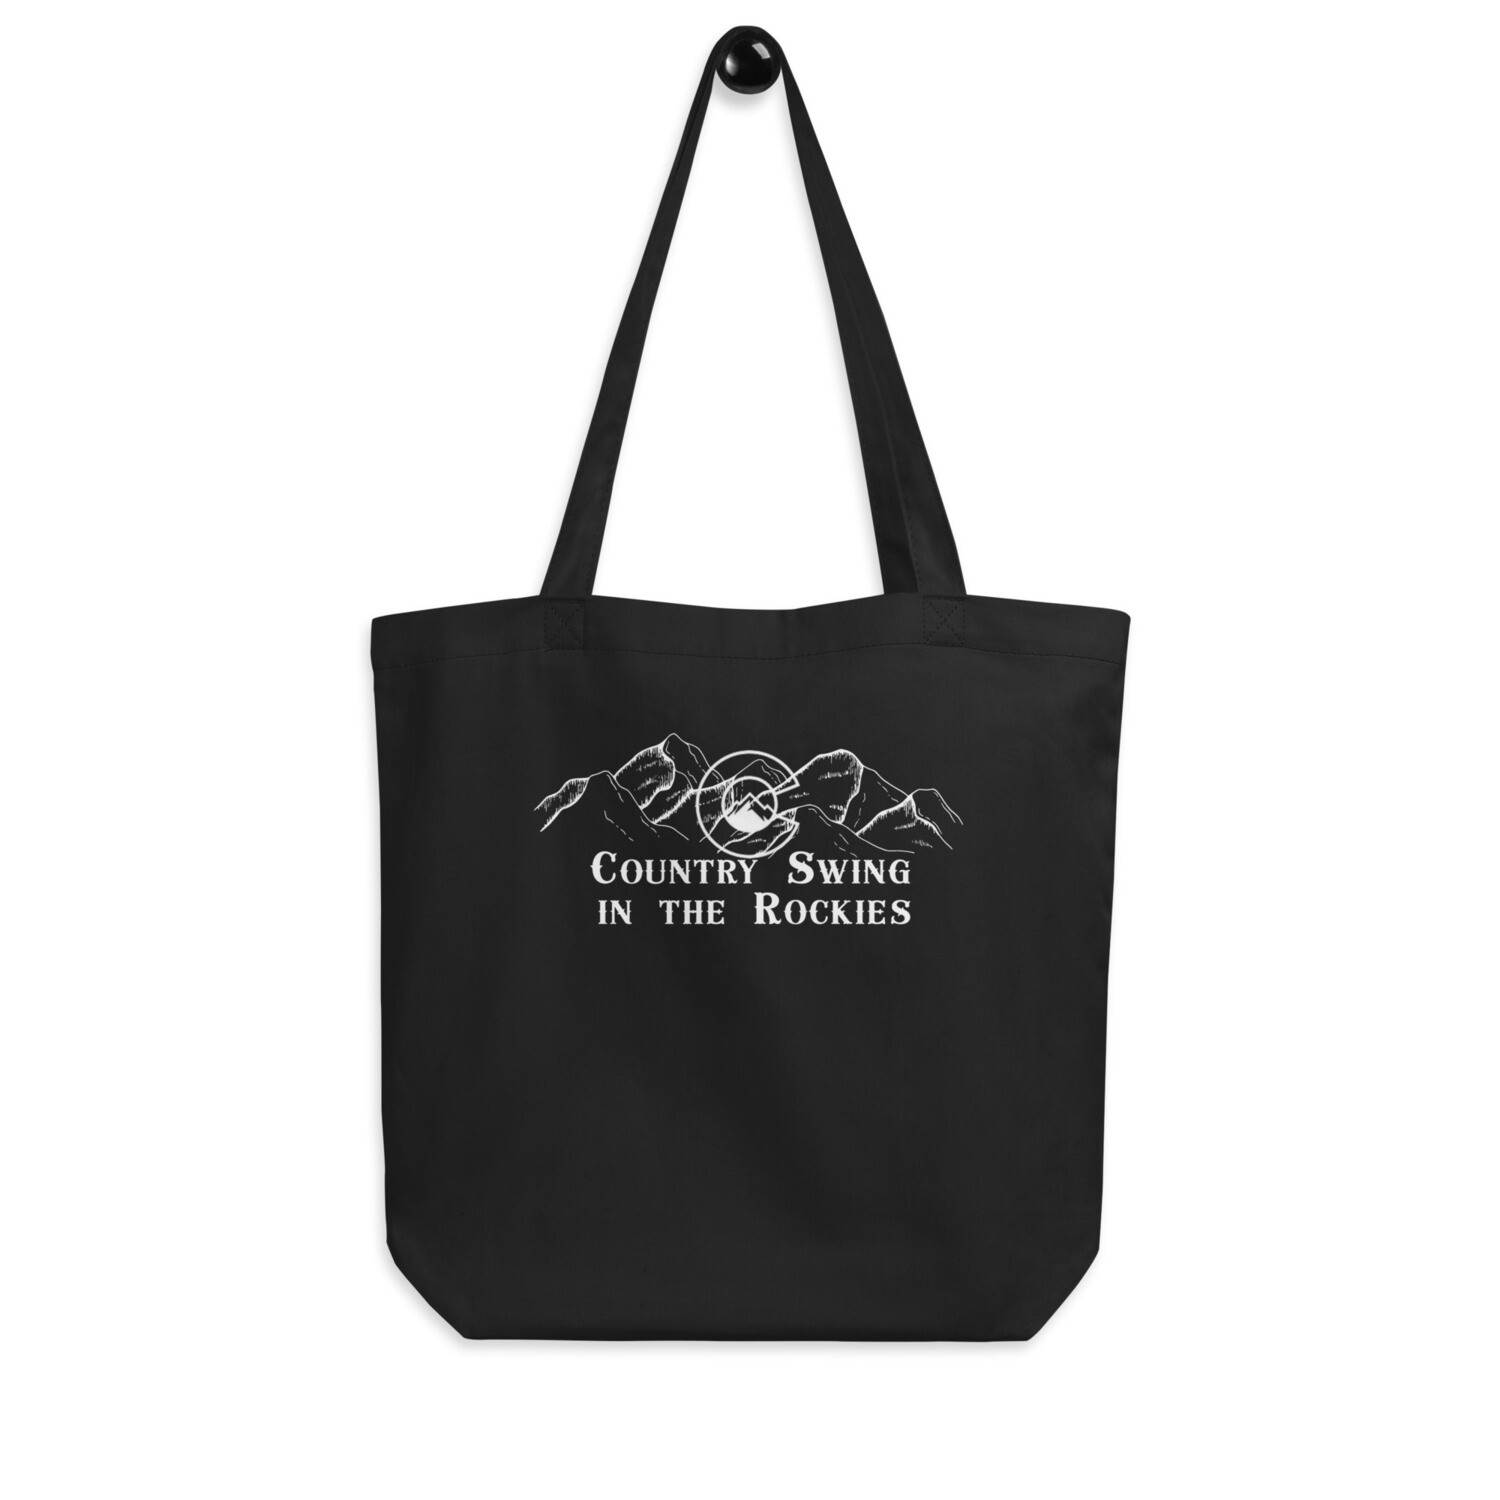 Eco Tote Bag - Country Swing in the Rockies